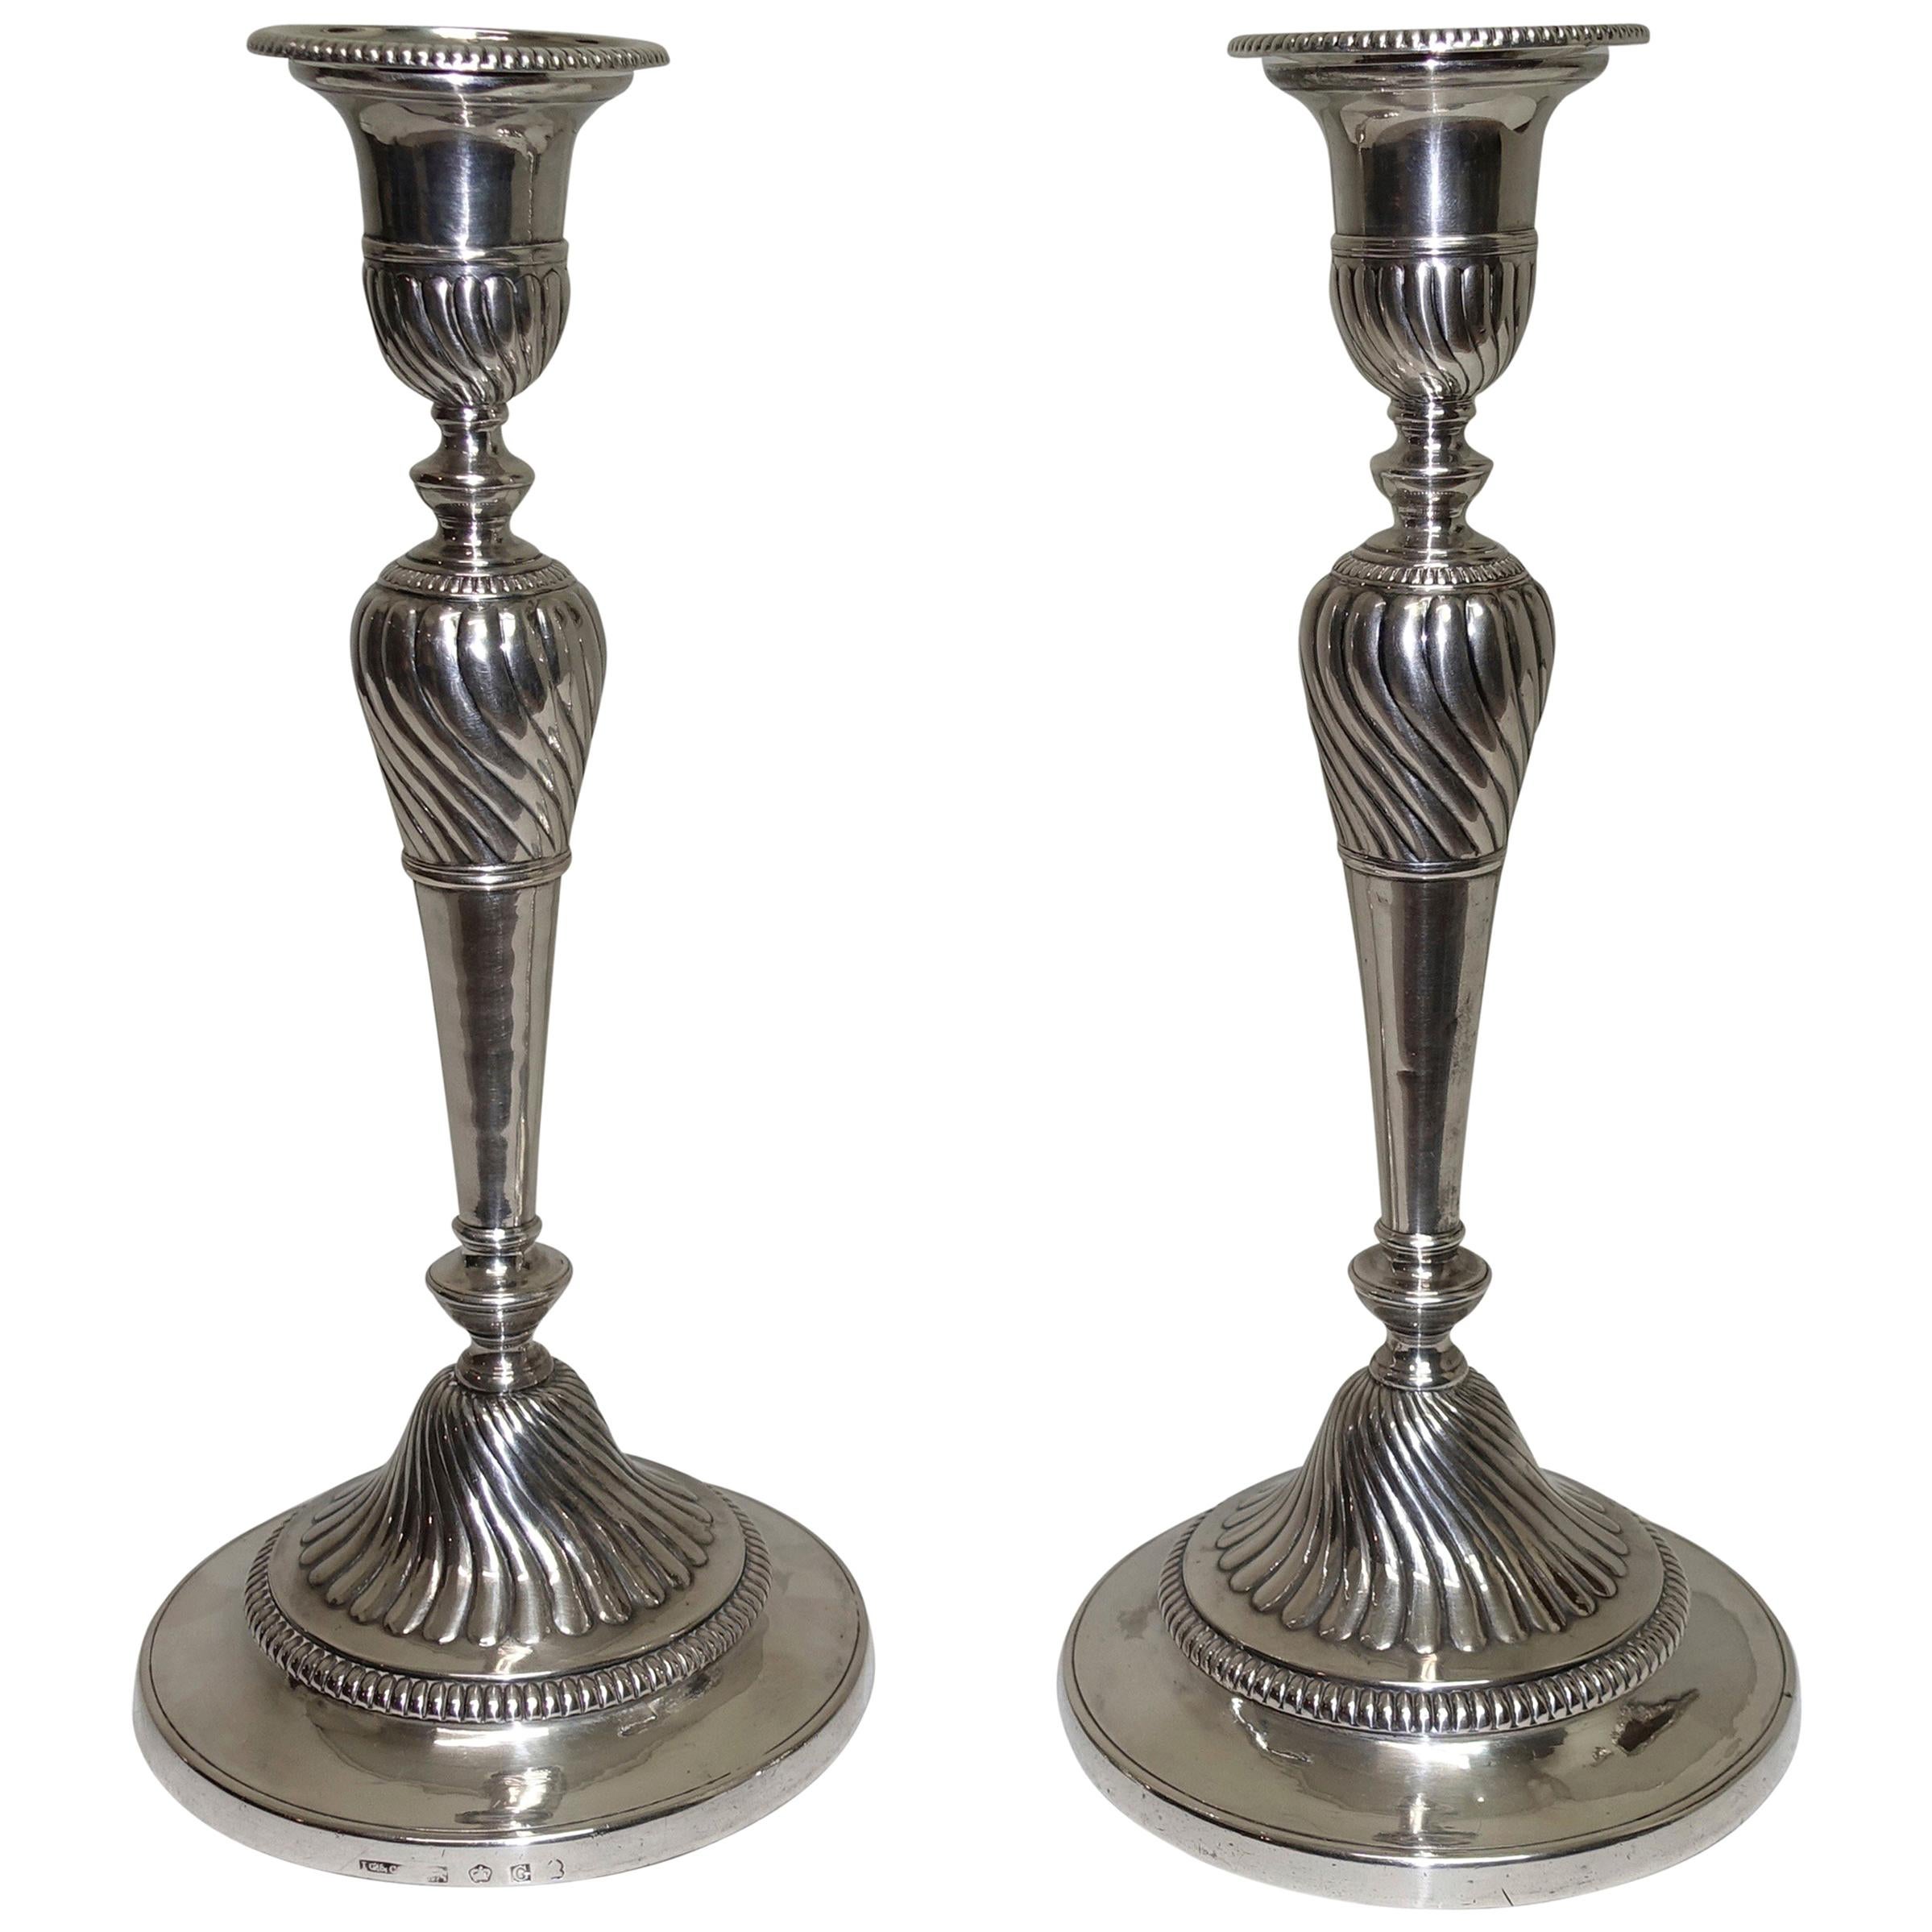 Pair of Sheffield George III Sterling Silver Candlesticks, English, circa 1800